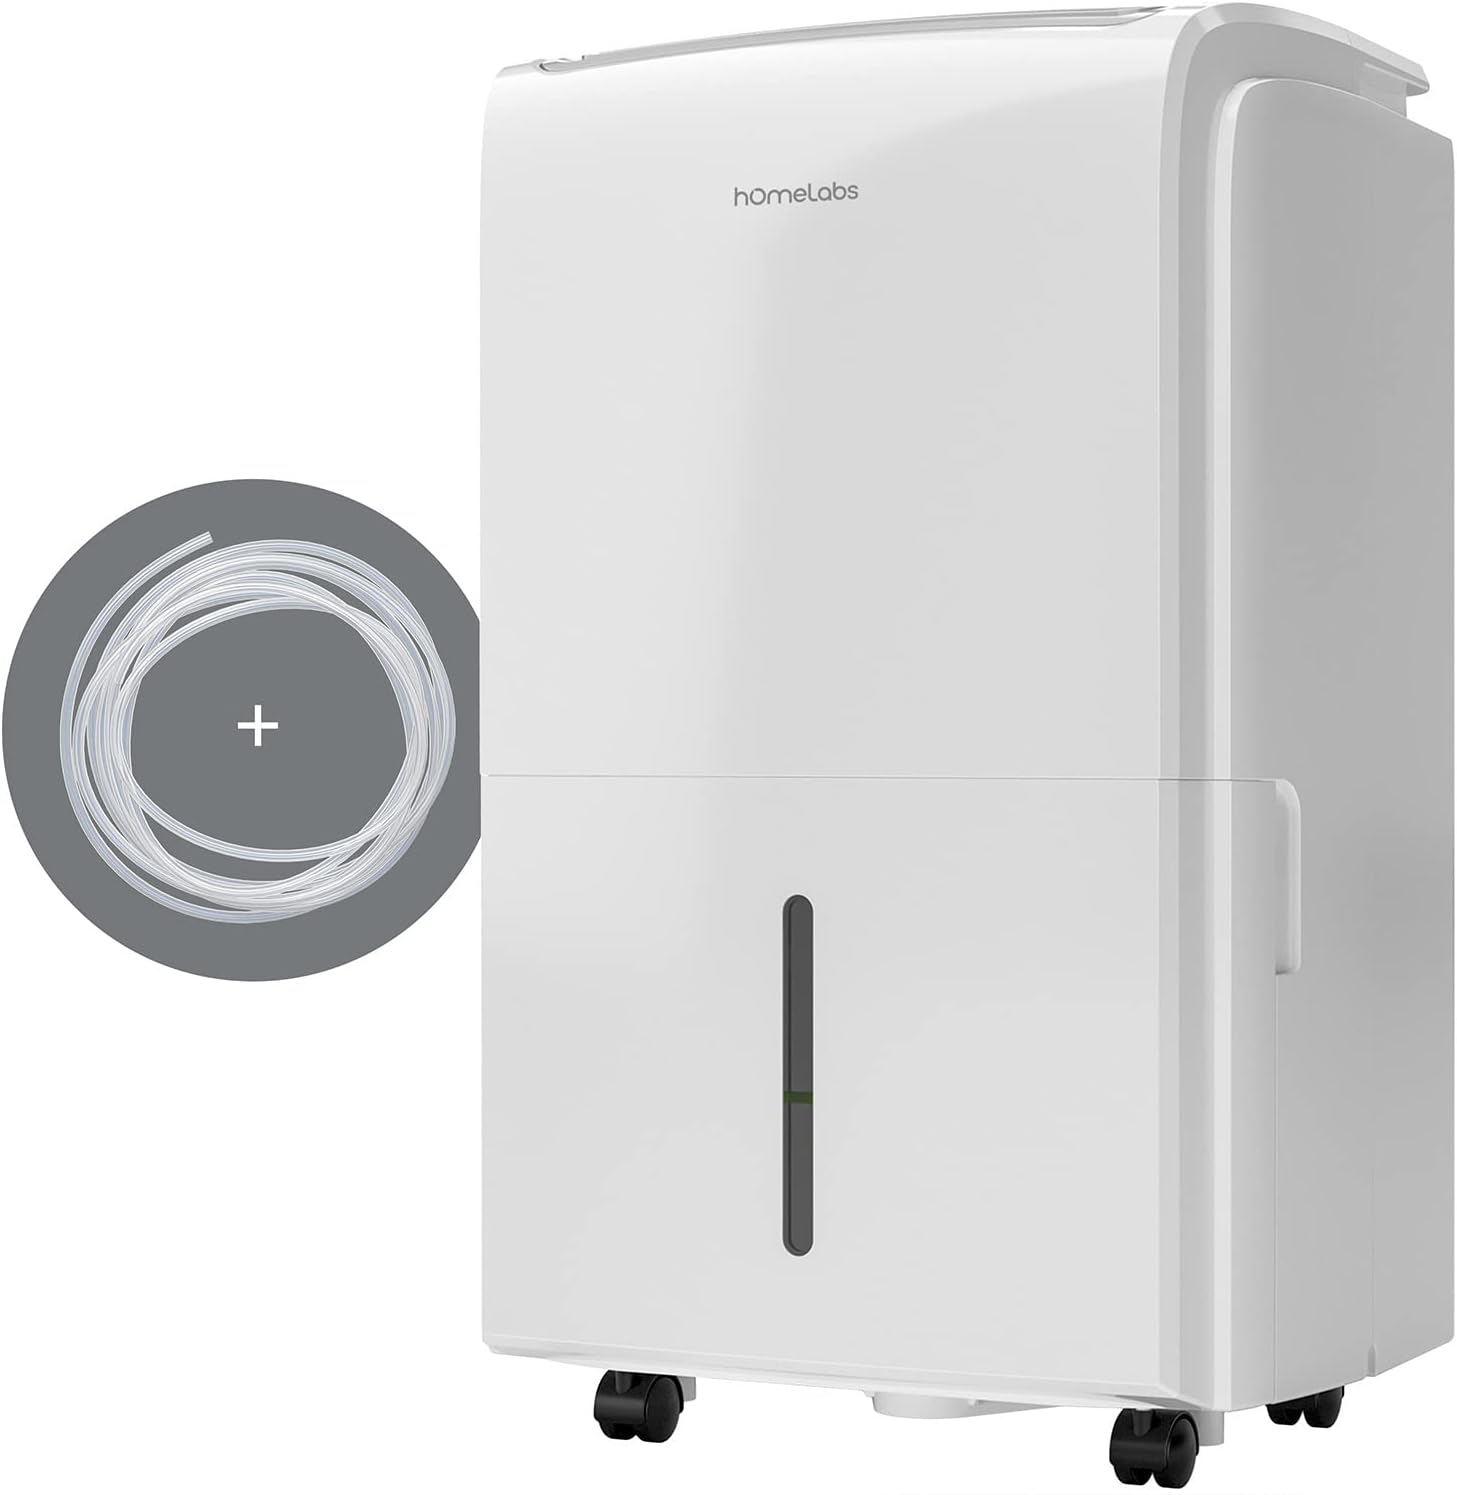 hOmeLabs 4500 Sq. Ft Energy Star Dehumidifier - Ideal for Large Rooms and Home Basements - Powerful Moisture Removal and Humidity Control - 50 Pint (Previously 70 Pint)